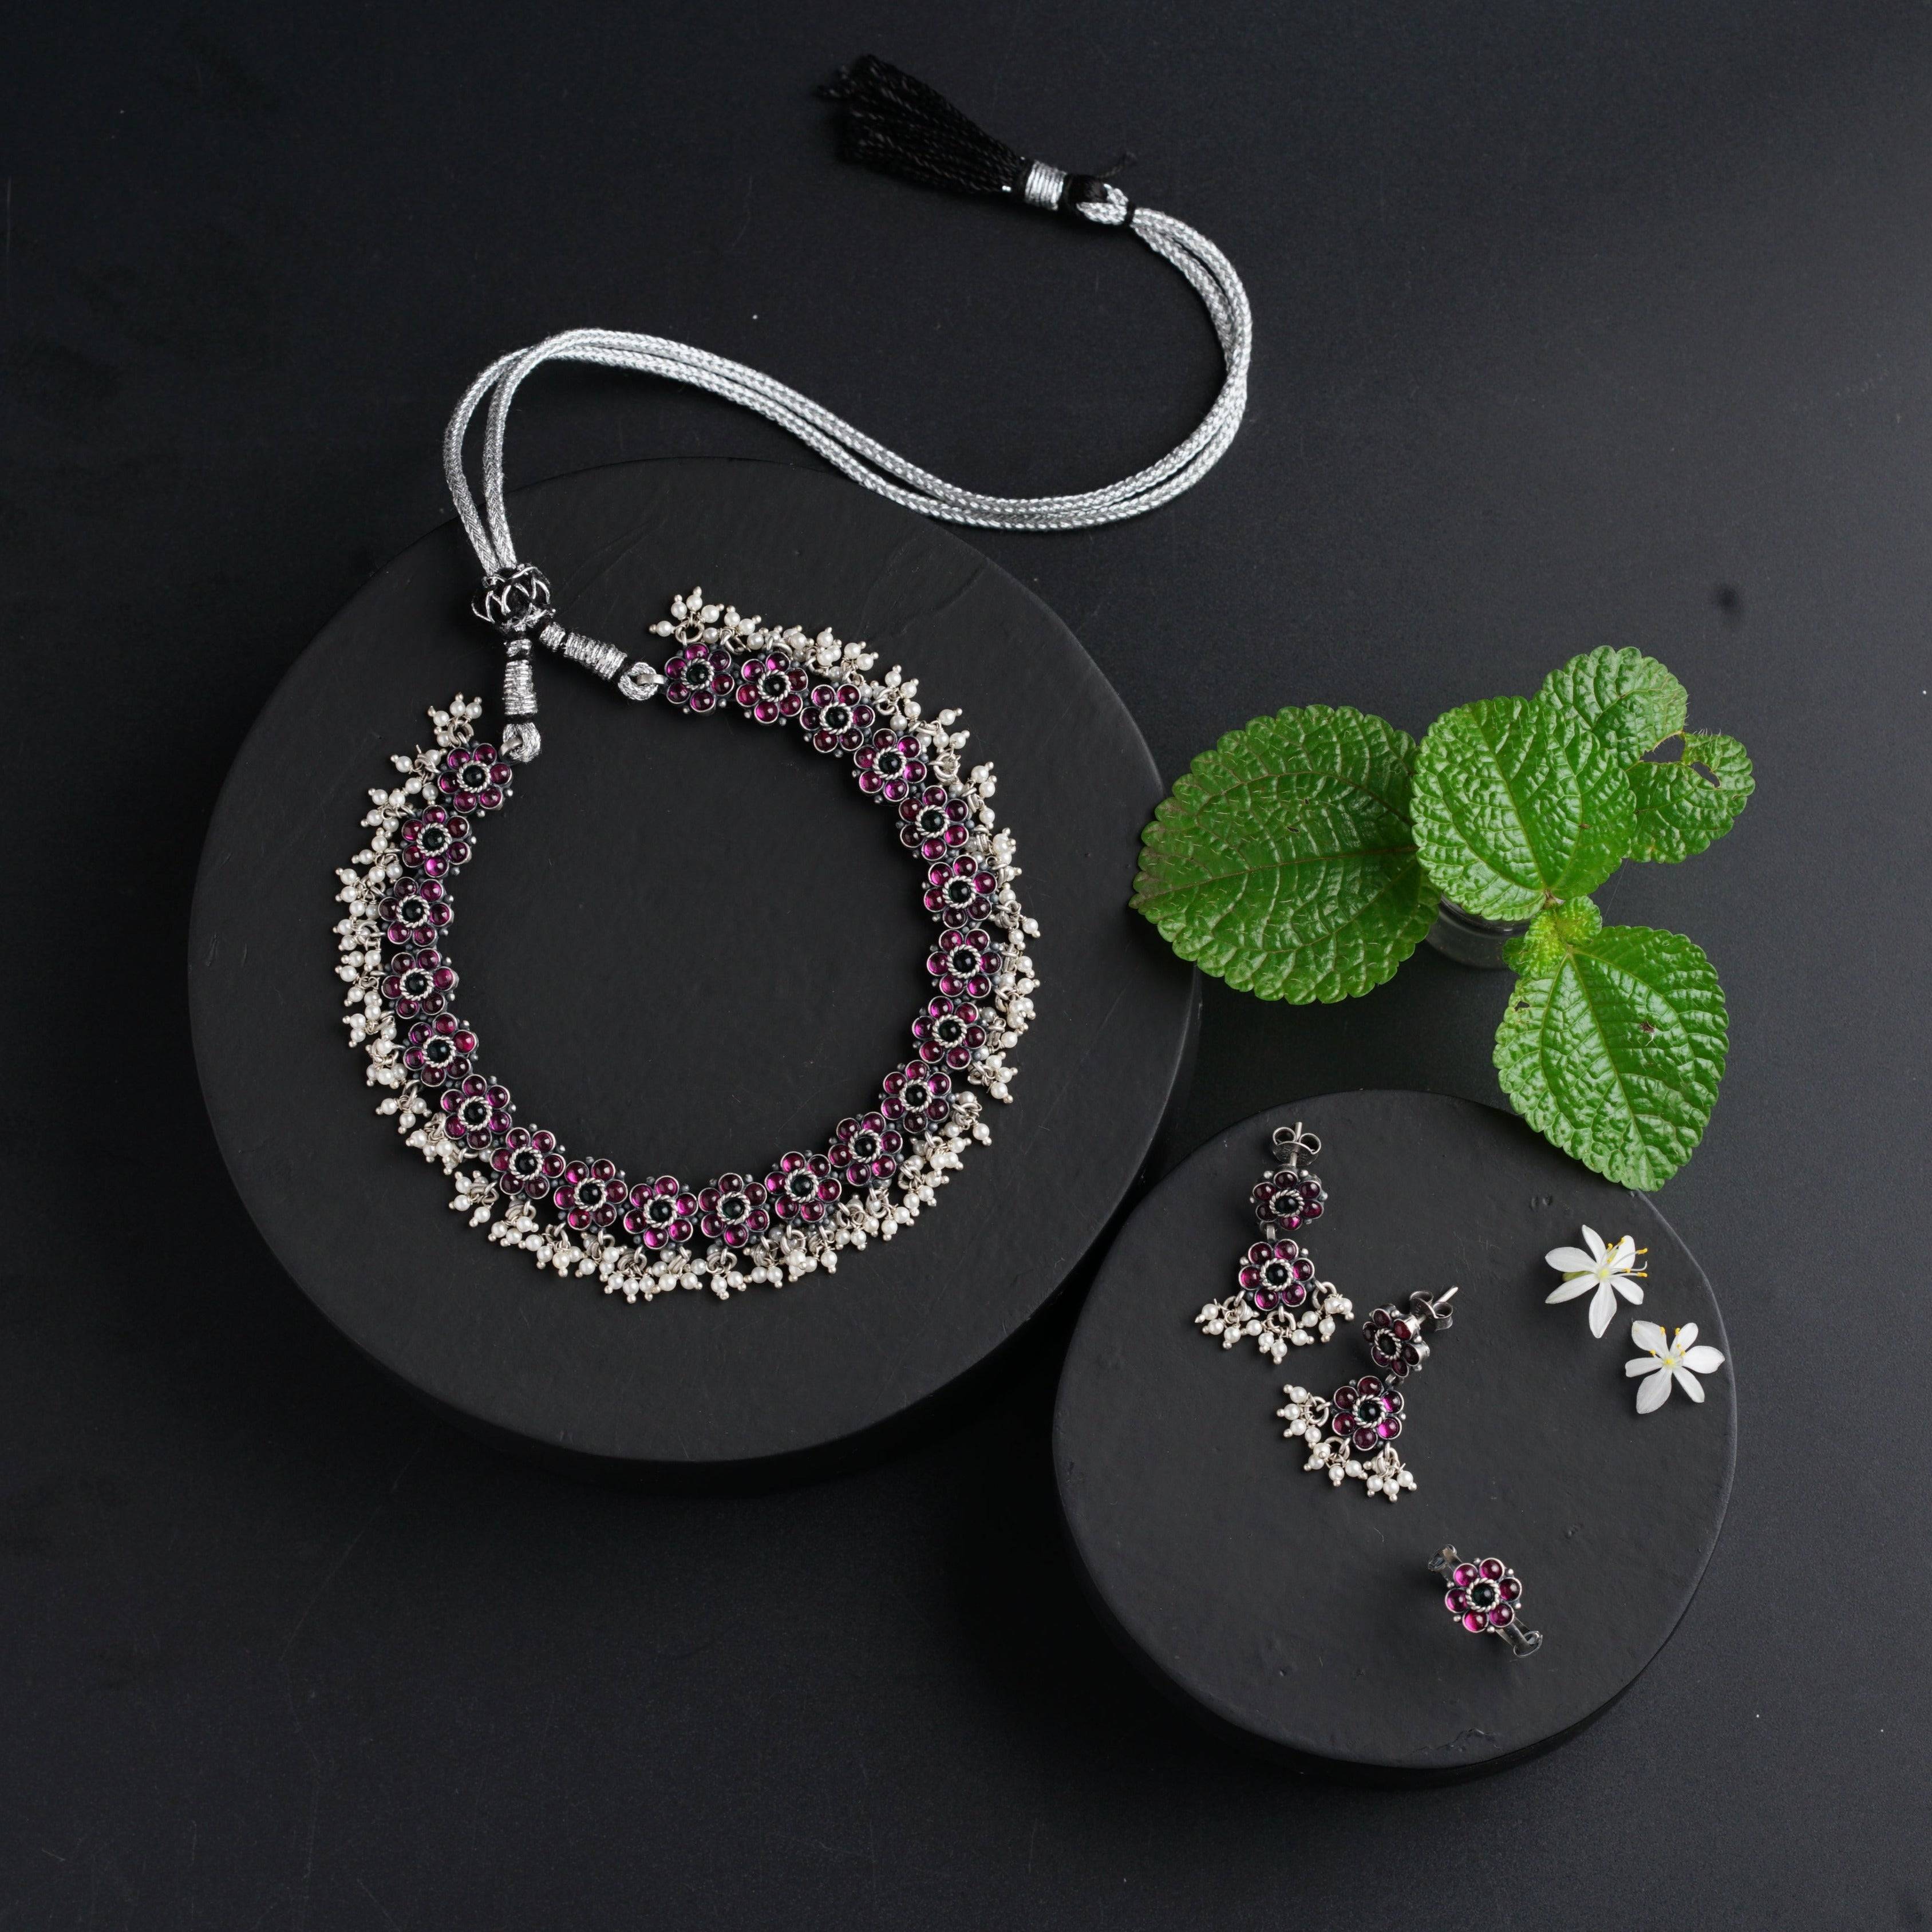 a necklace and earrings on a plate next to a leaf